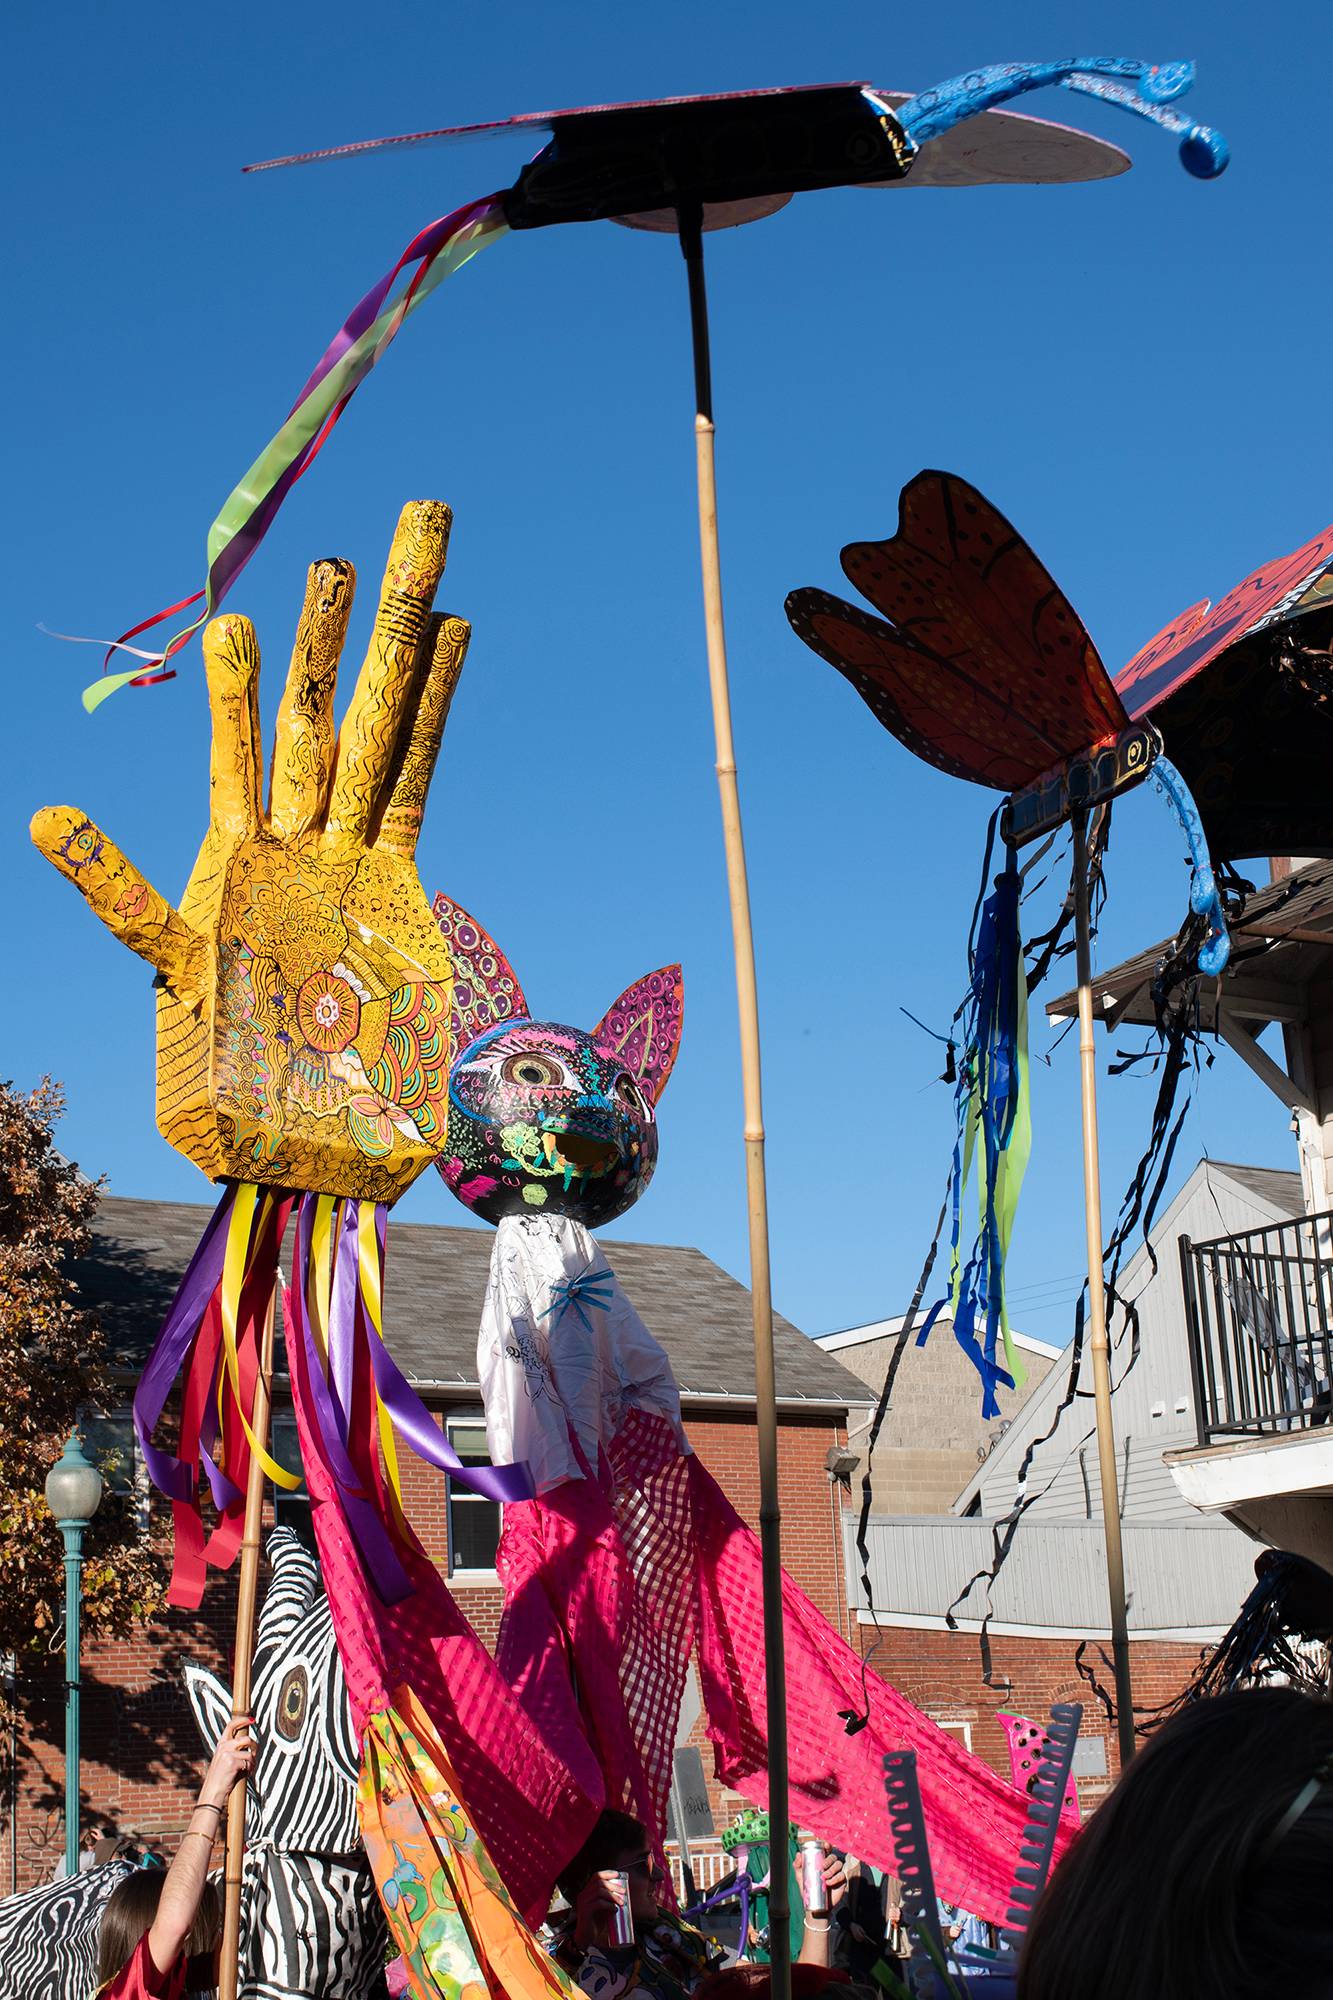 Hand crafted floats are waved through the air during the 2022 Honey for the Heart Parade on Court Street in Athens, Ohio.